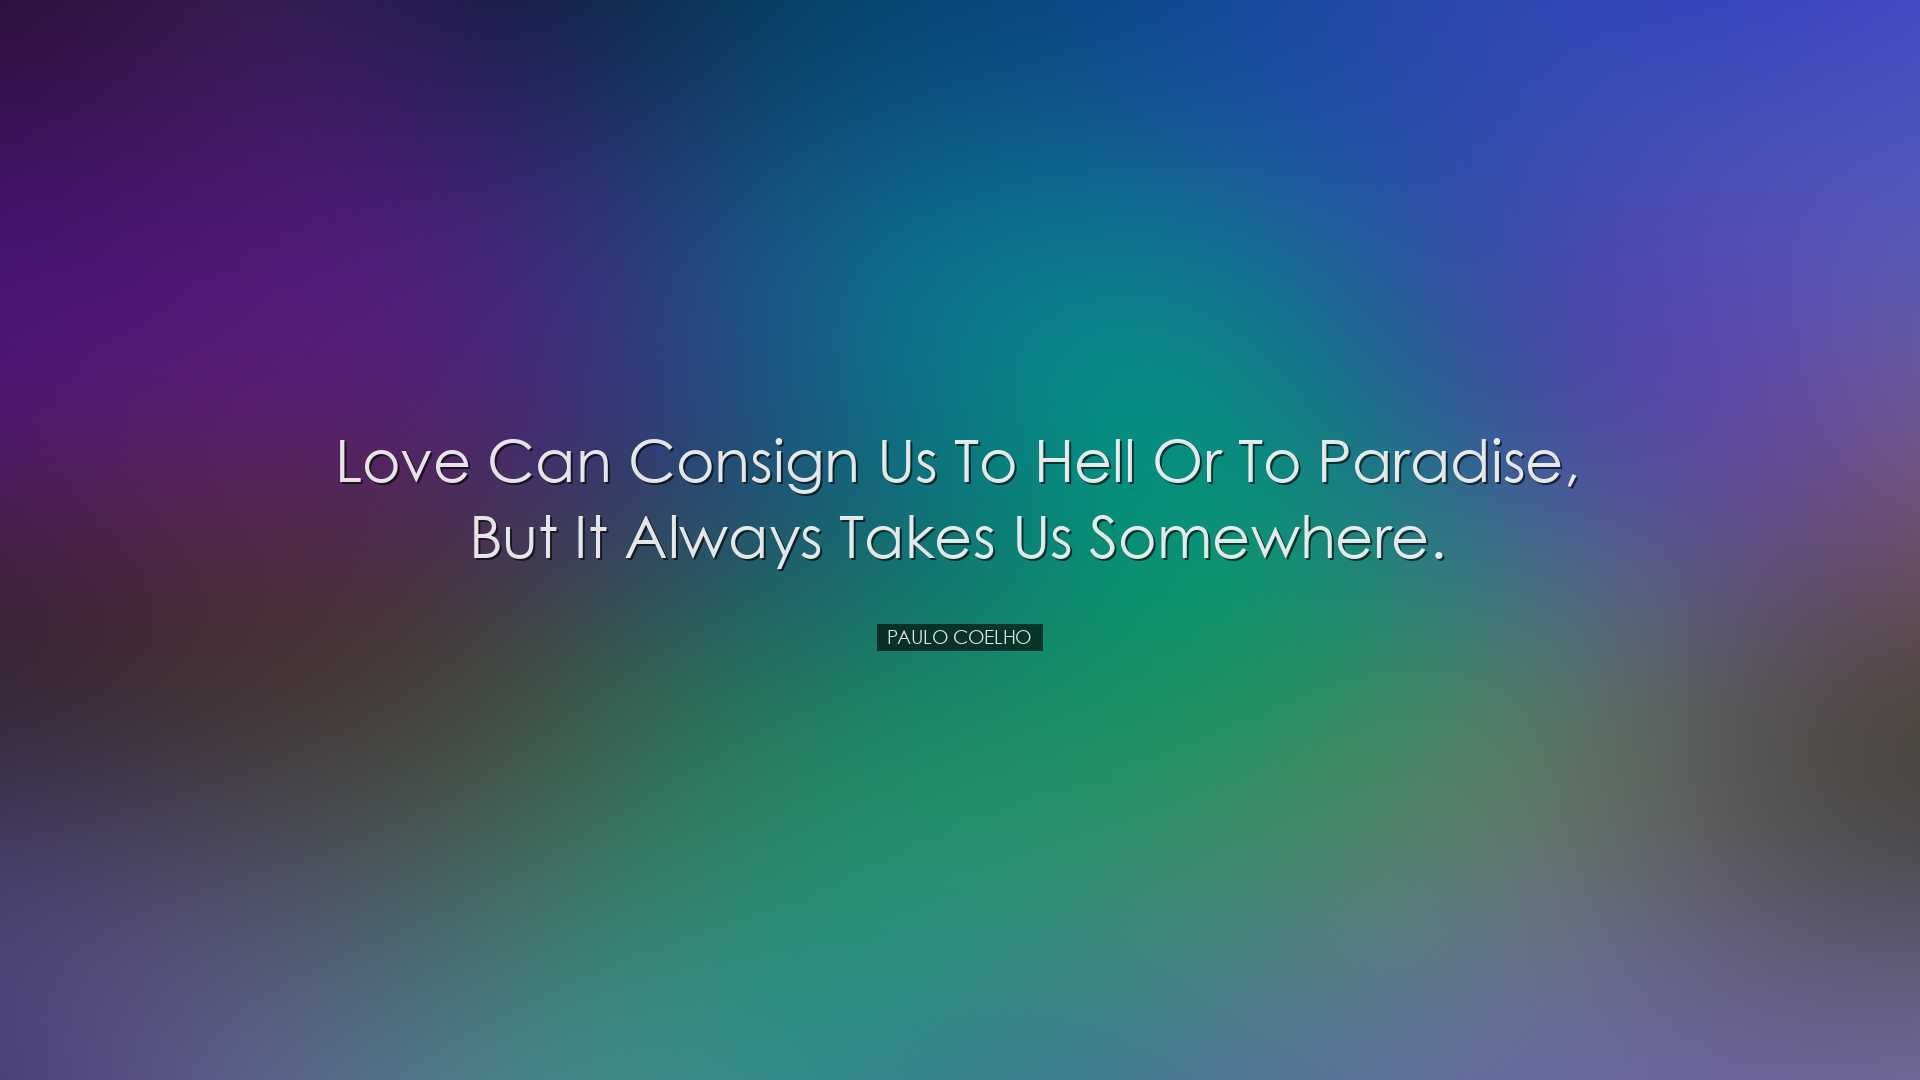 Love can consign us to hell or to paradise, but it always takes us